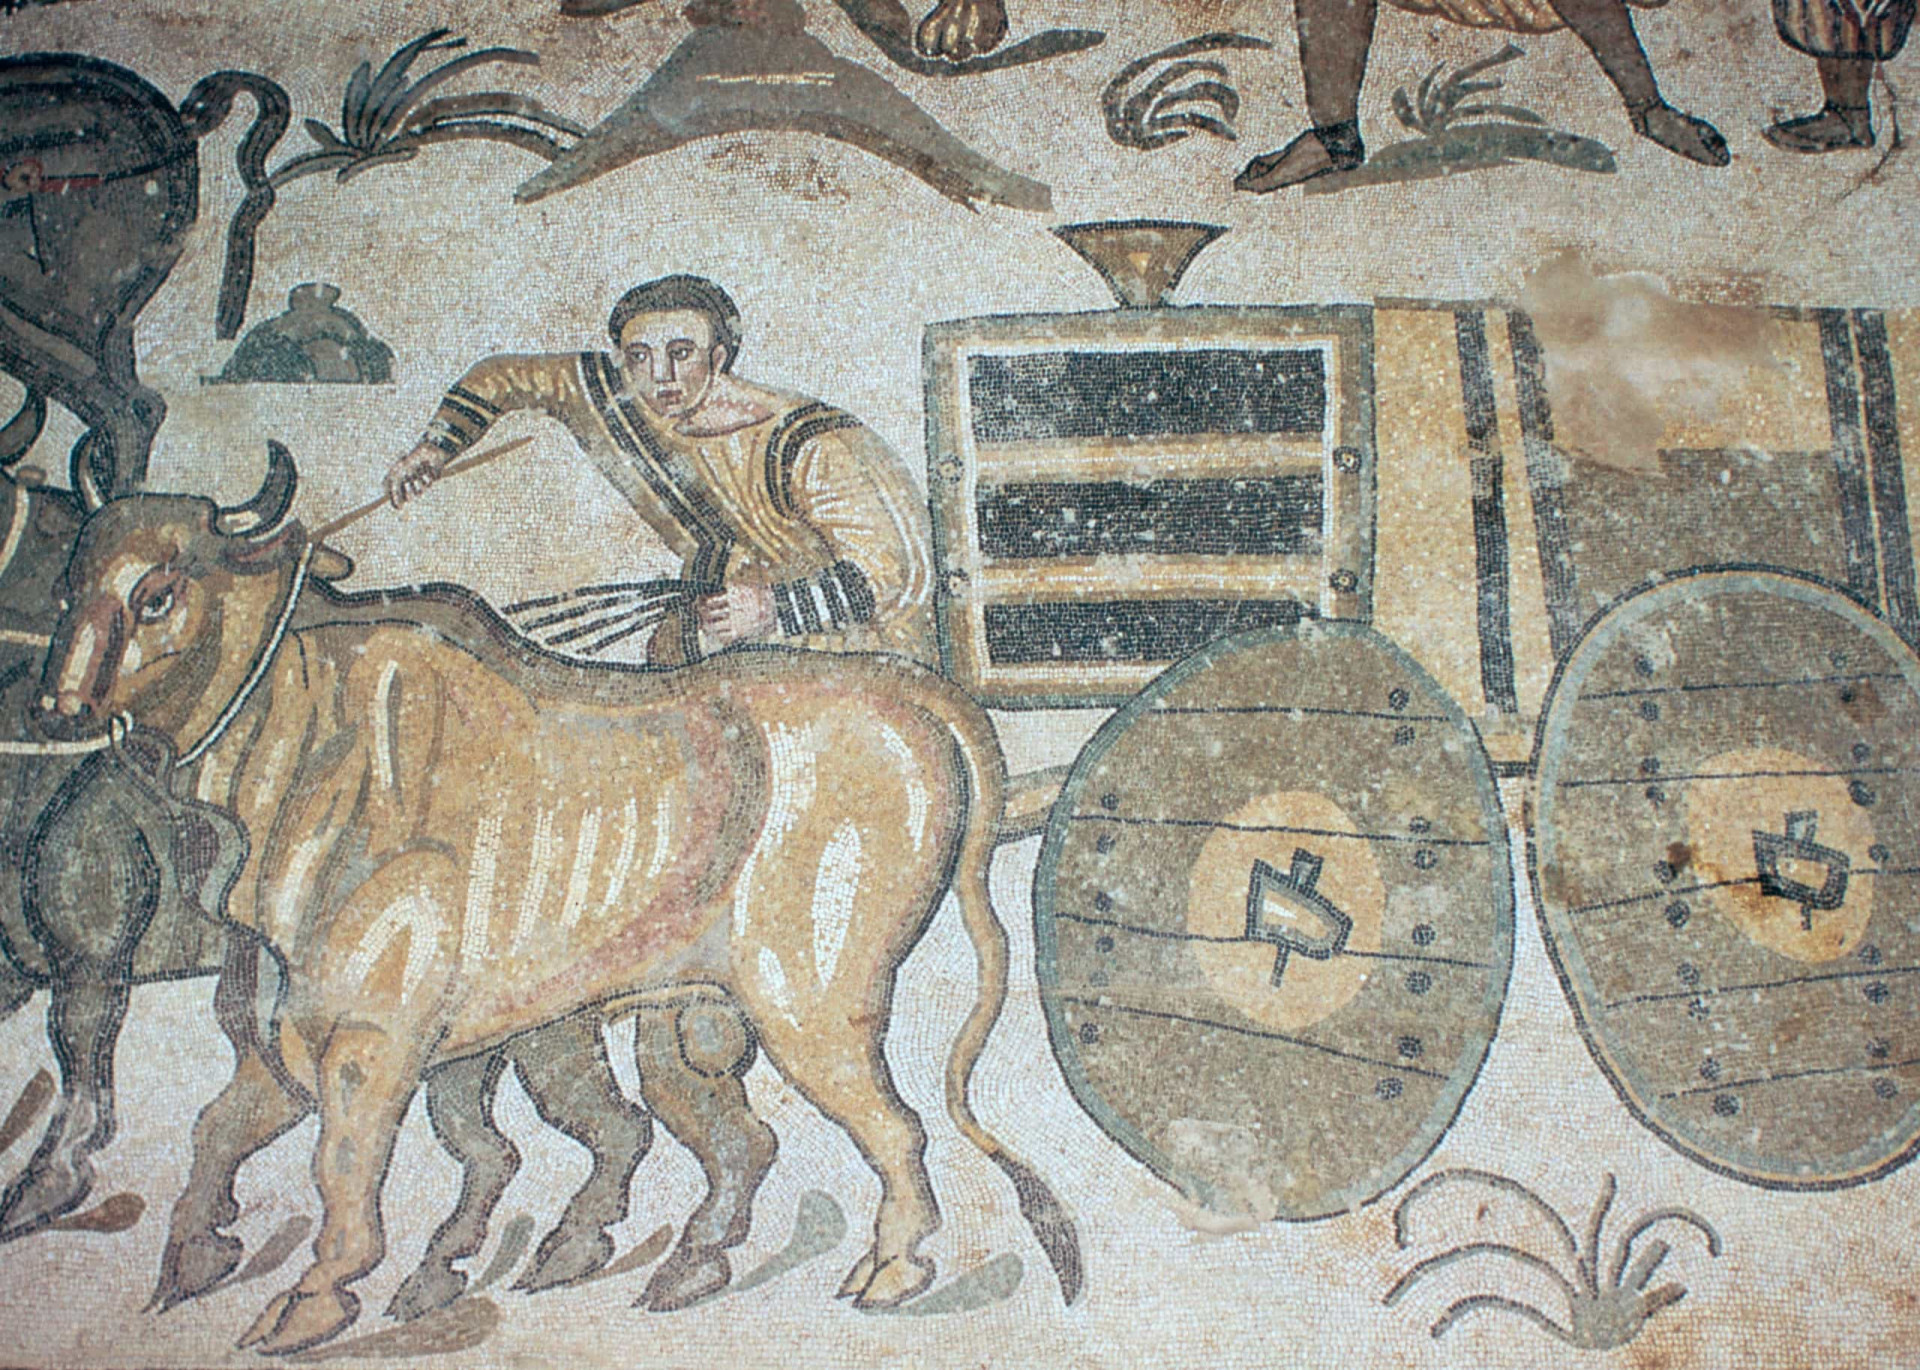 <p>Cattle were often used to pull carts, which became known as bullock carriages. Archaeological evidence dates this mode of transport to as far back as 4400 BCE. The Romans employed livestock to haul materials, as illustrated by this mosaic from the Villa Romana del Casale in Sicily.</p><p>You may also like:<a href="https://www.starsinsider.com/n/175806?utm_source=msn.com&utm_medium=display&utm_campaign=referral_description&utm_content=516219v1en-us"> George Clooney and other actors who totally transformed their bodies for a movie</a></p>